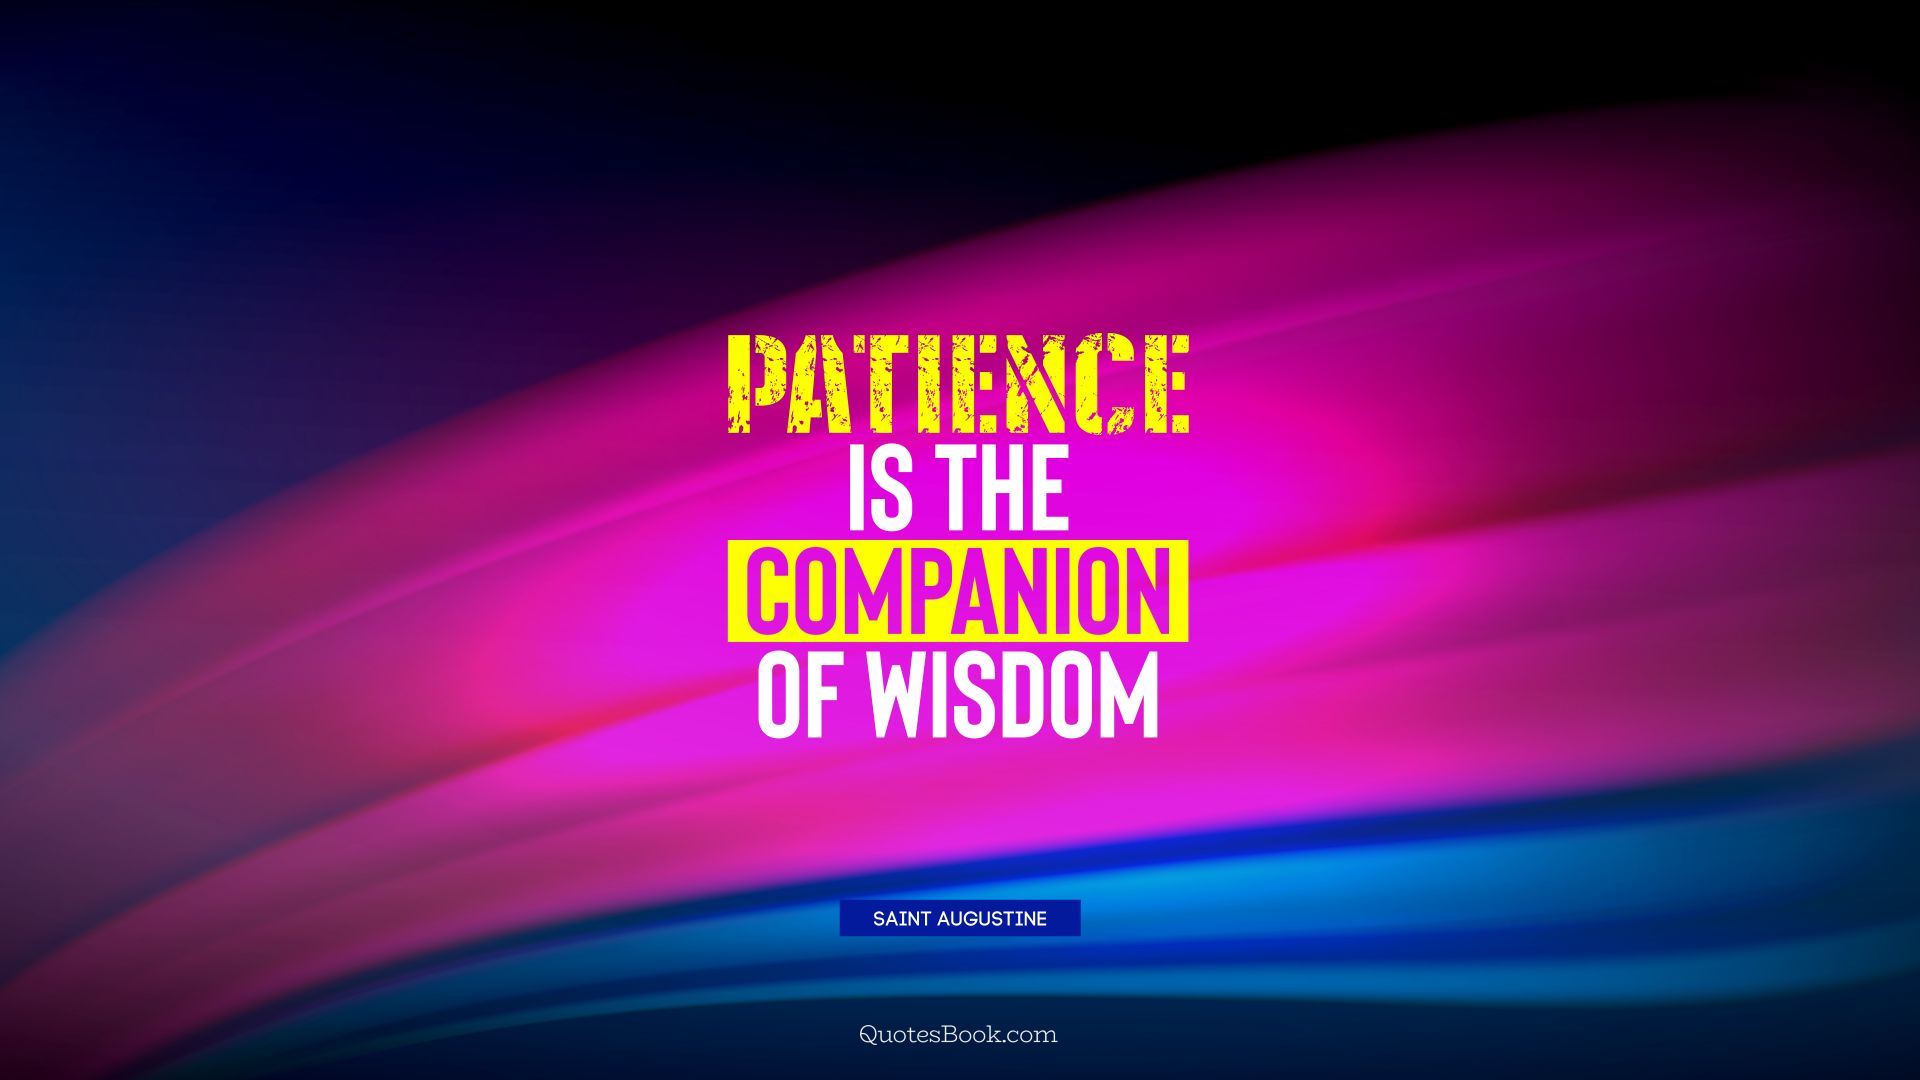 Patience is the companion of wisdom. - Quote by Saint Augustine